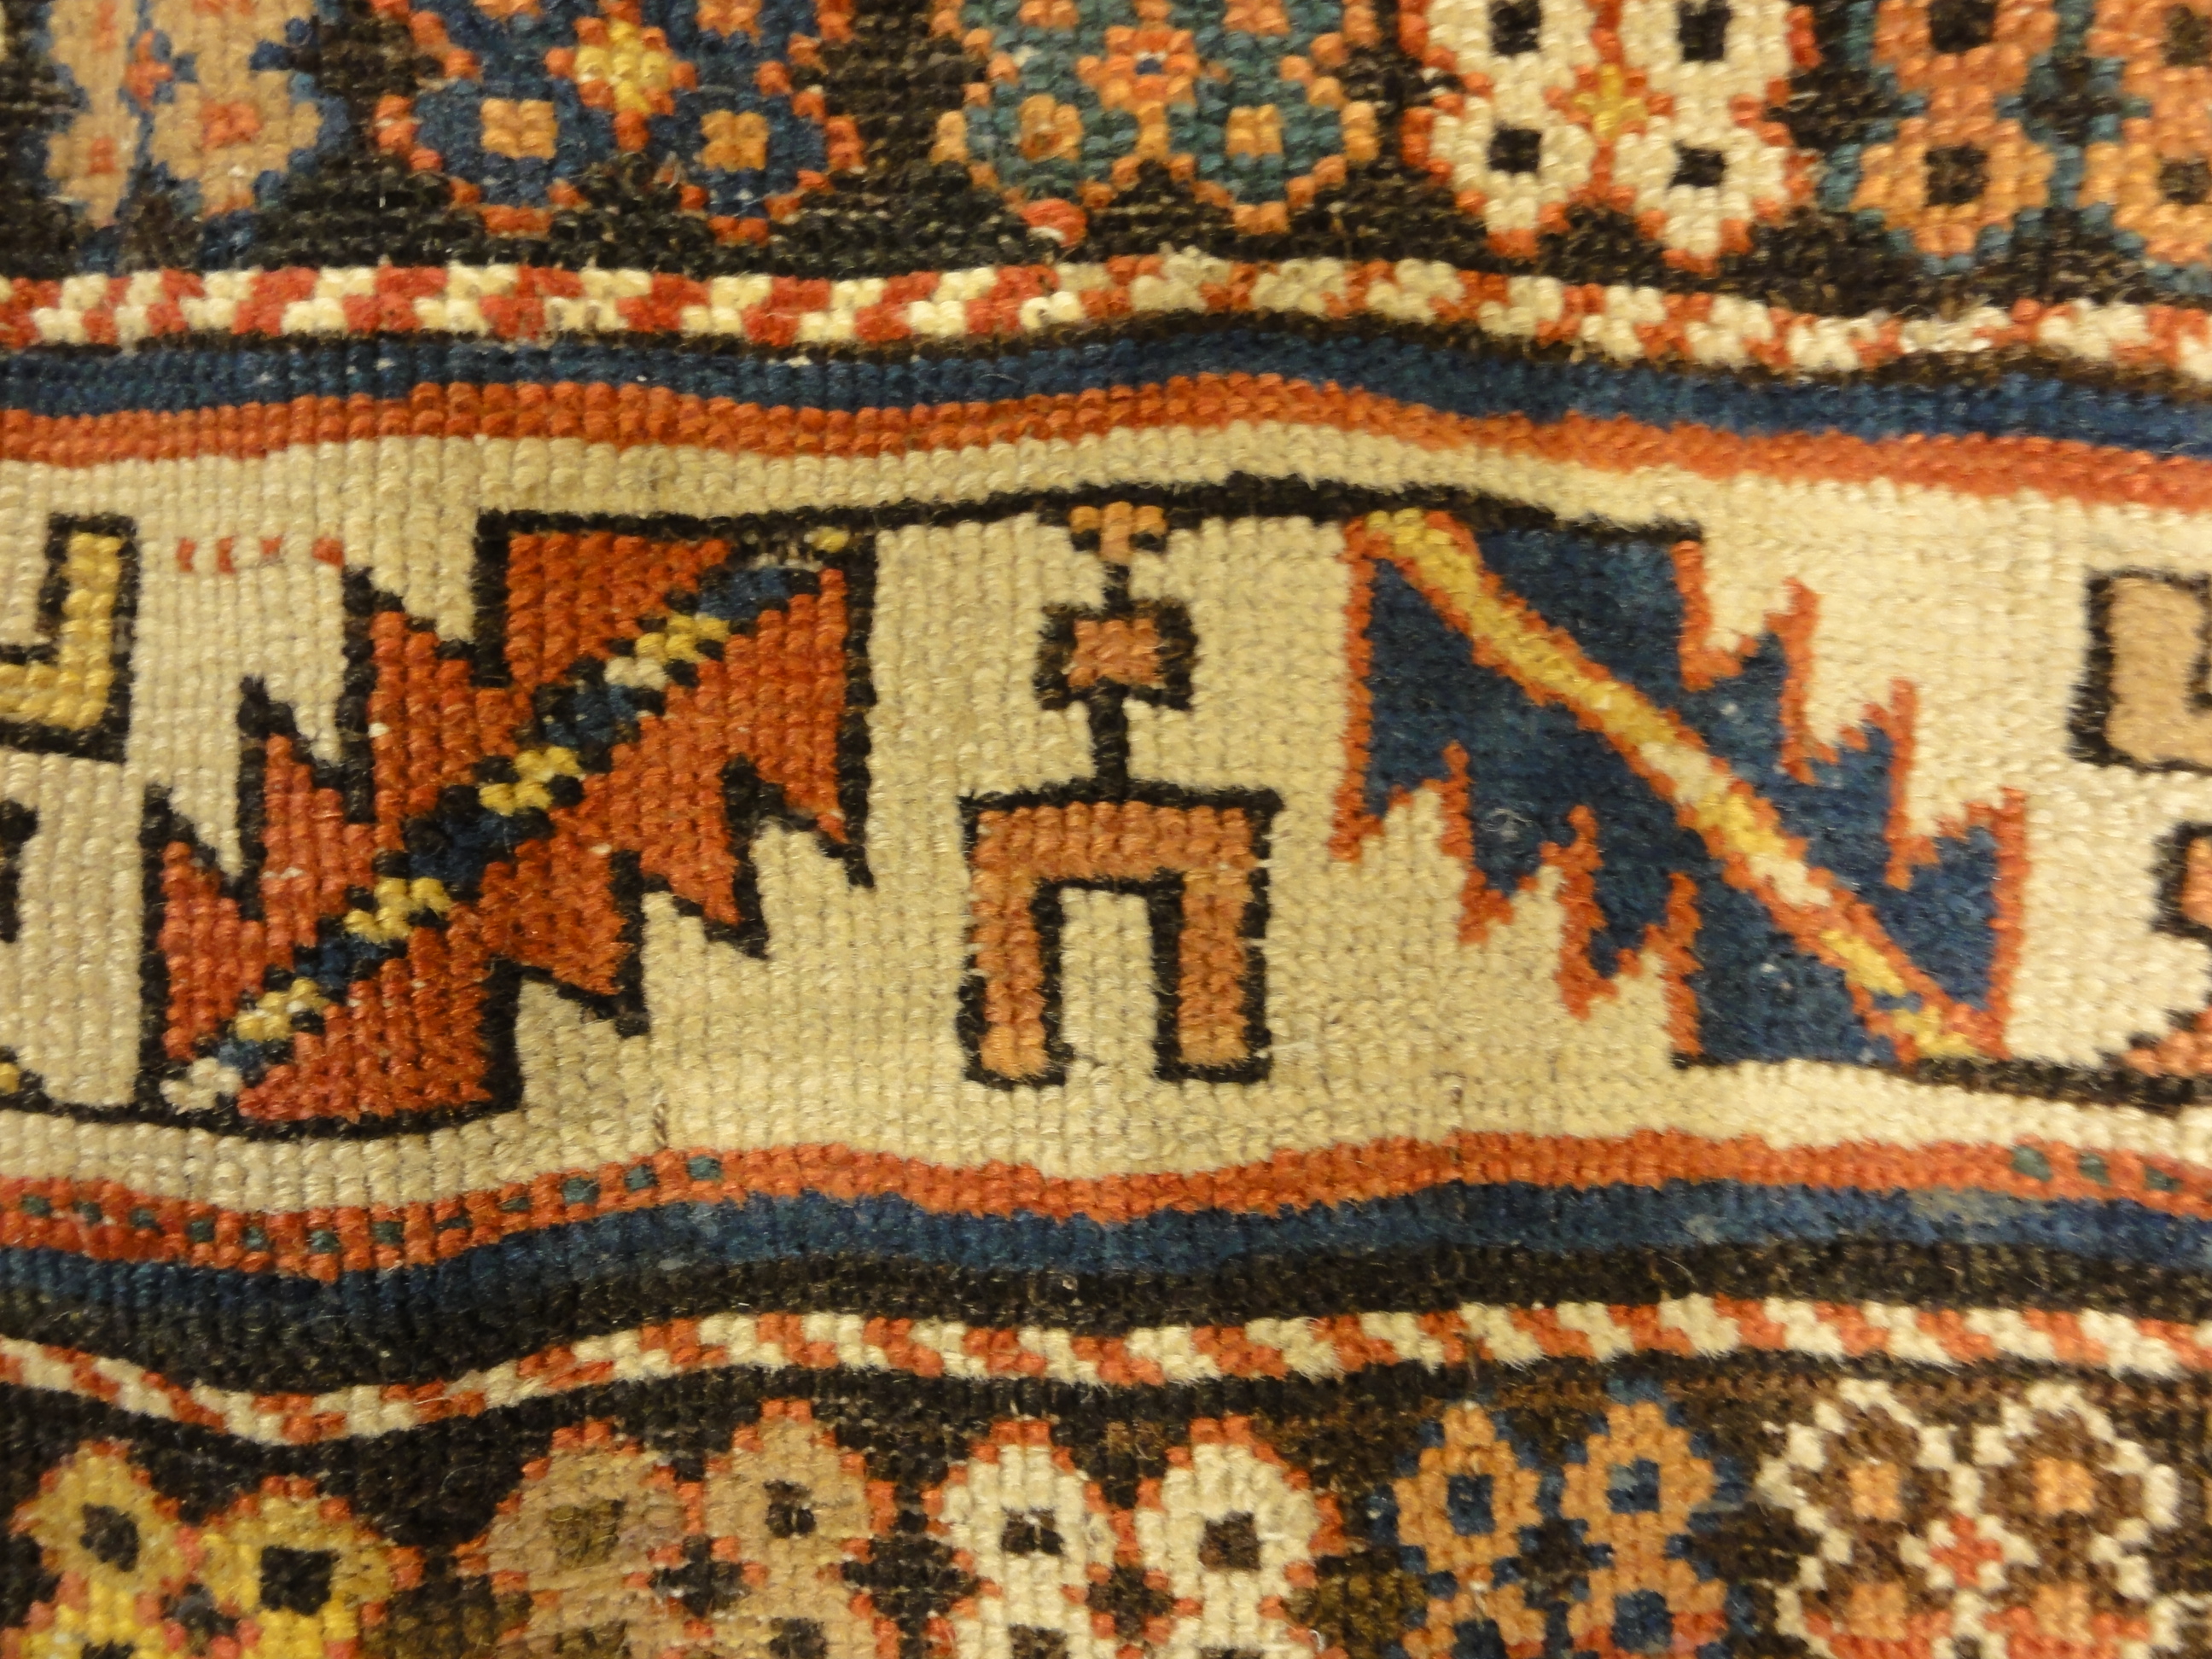 Antique Shirvan Runner Rug. A piece of authentic antique genuine woven carpet art sold by Santa Barbara Design Center, Rugs and More.